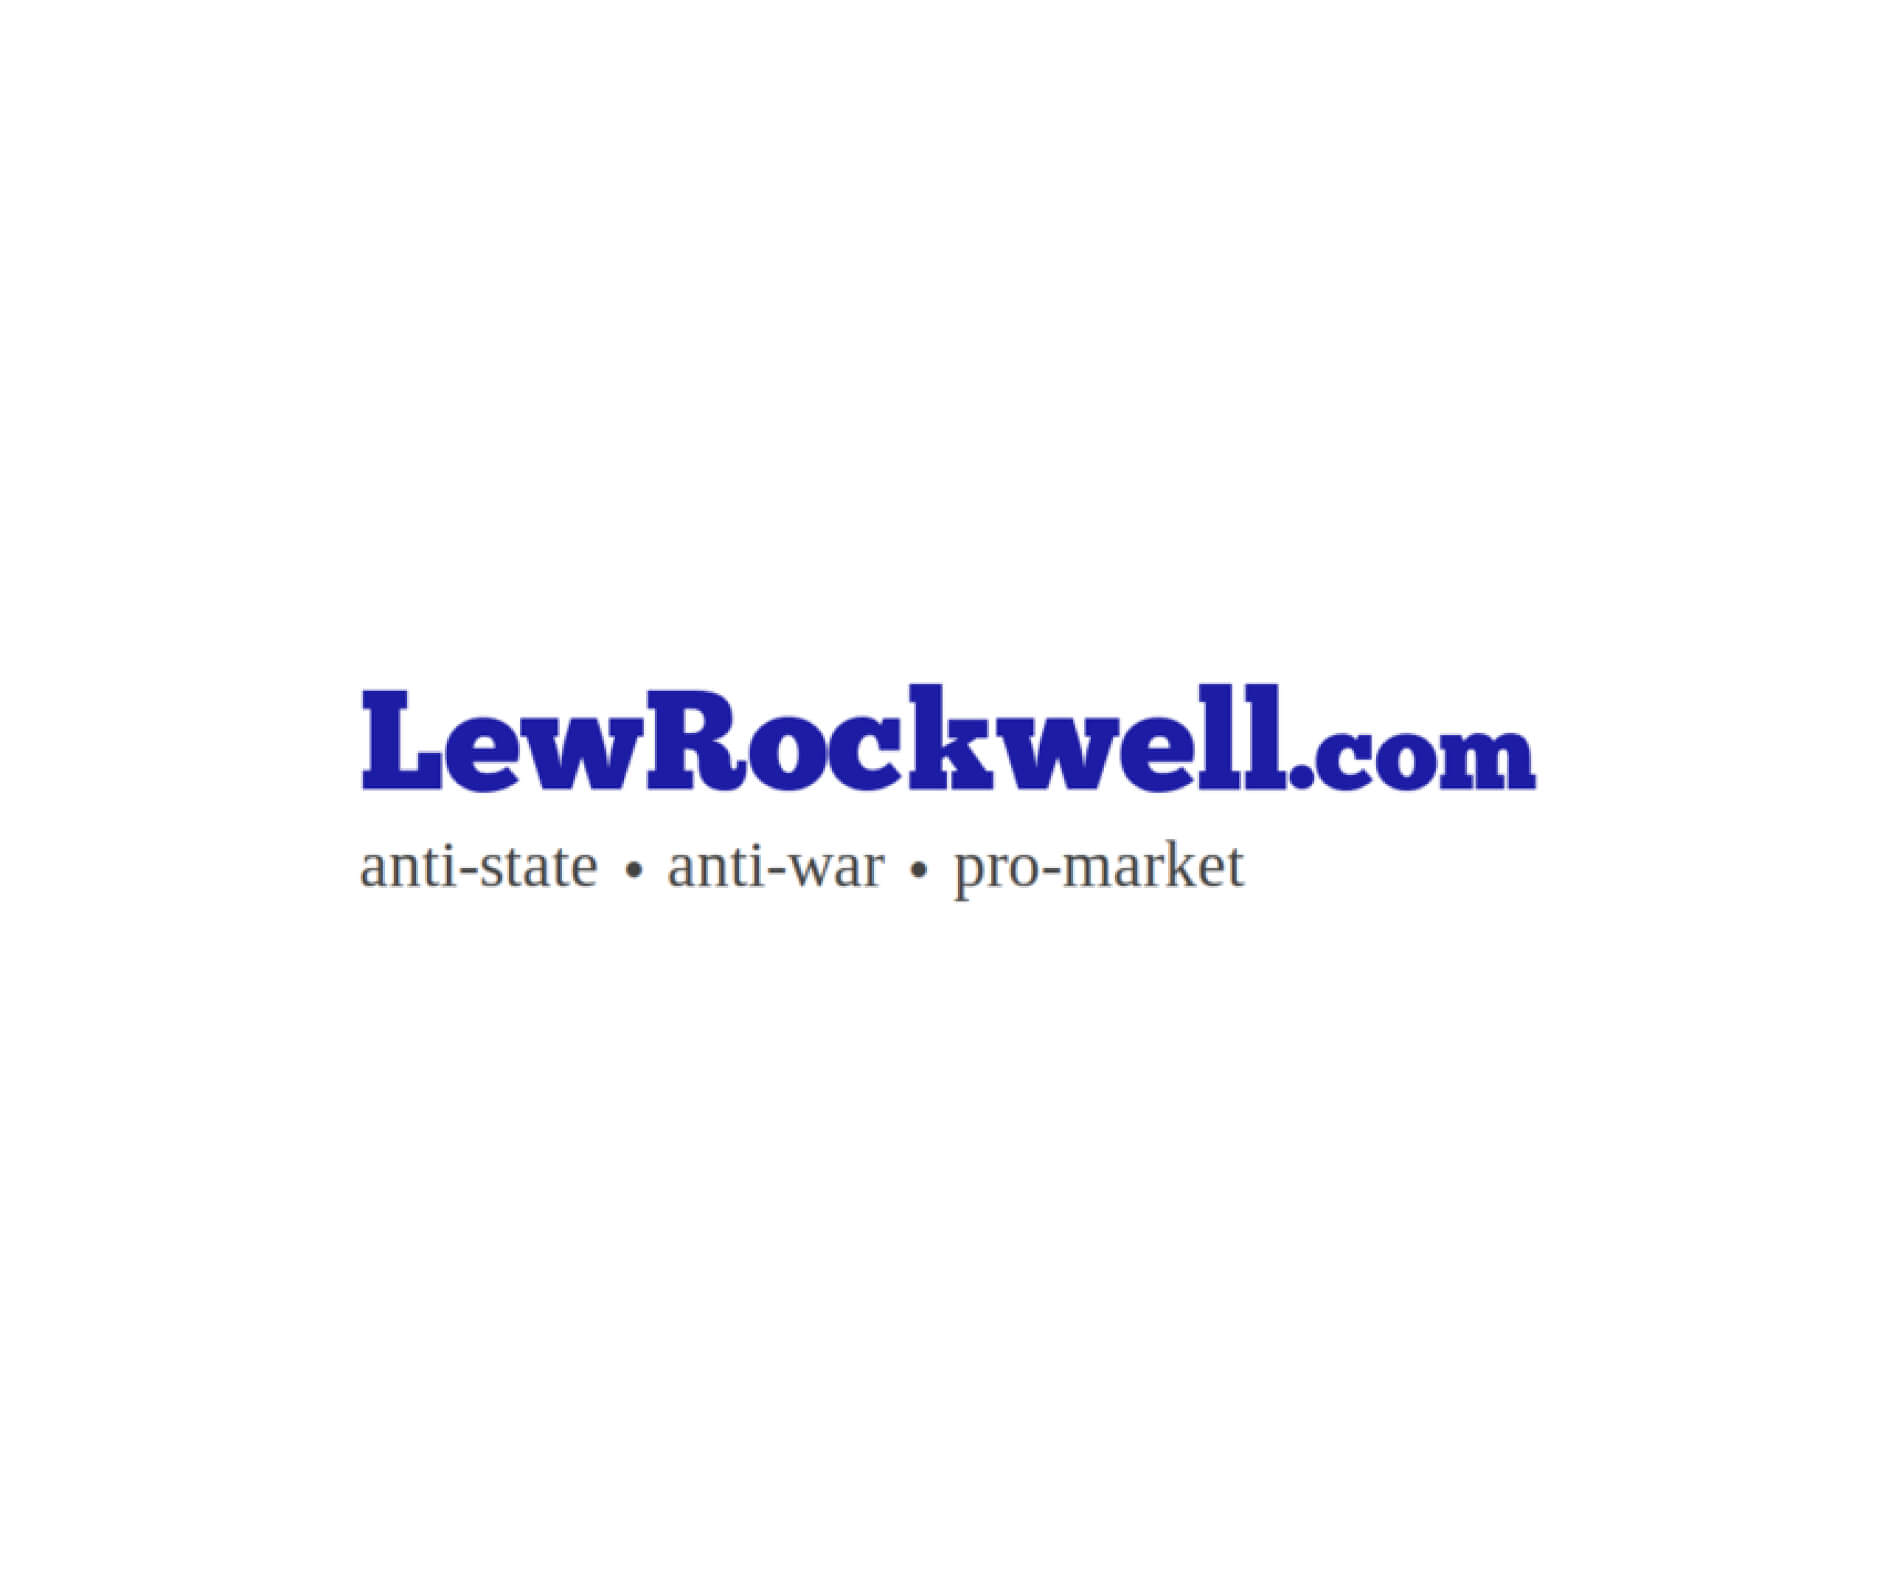 attention-lewrockwell.com-readers!-treat-the-students-in-your-life-to-the-best-week-of-their-year